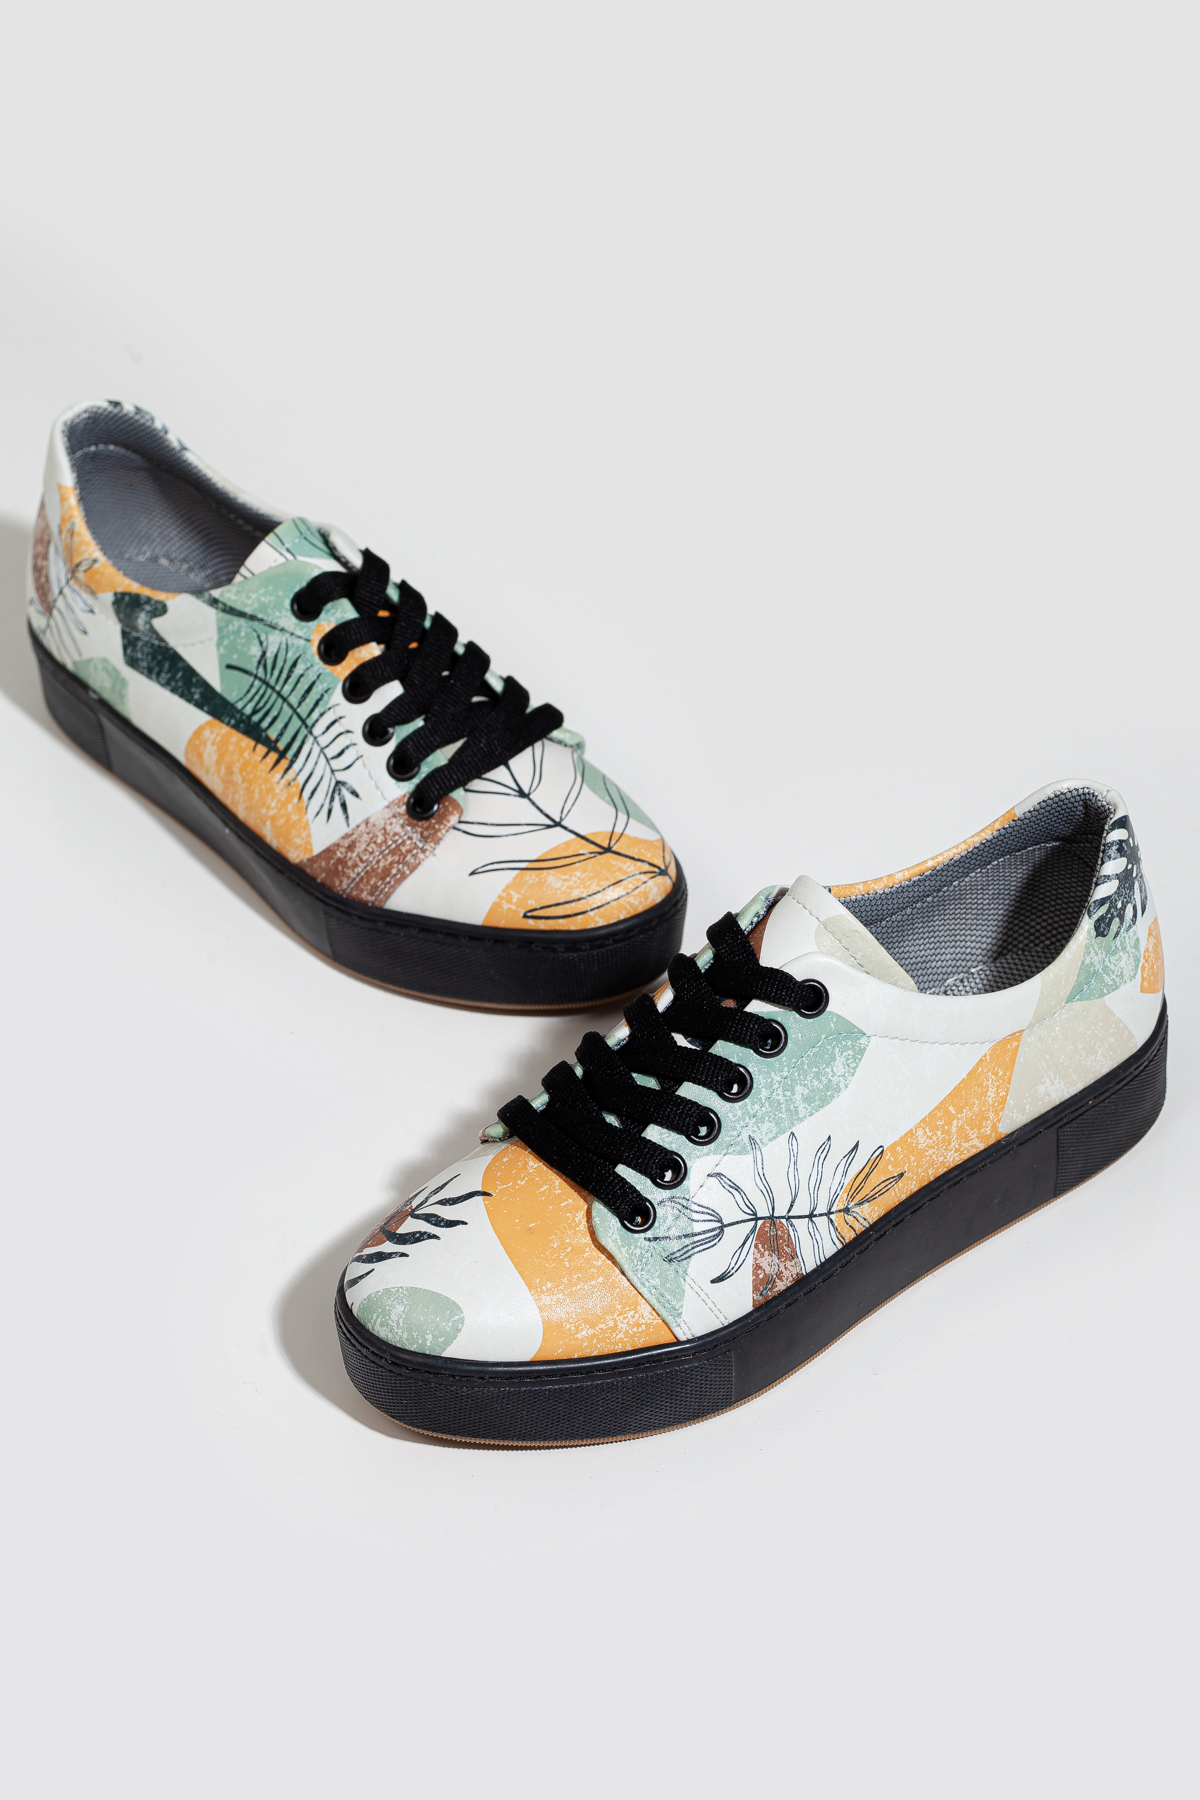 Autumn patterned sneakers shoes